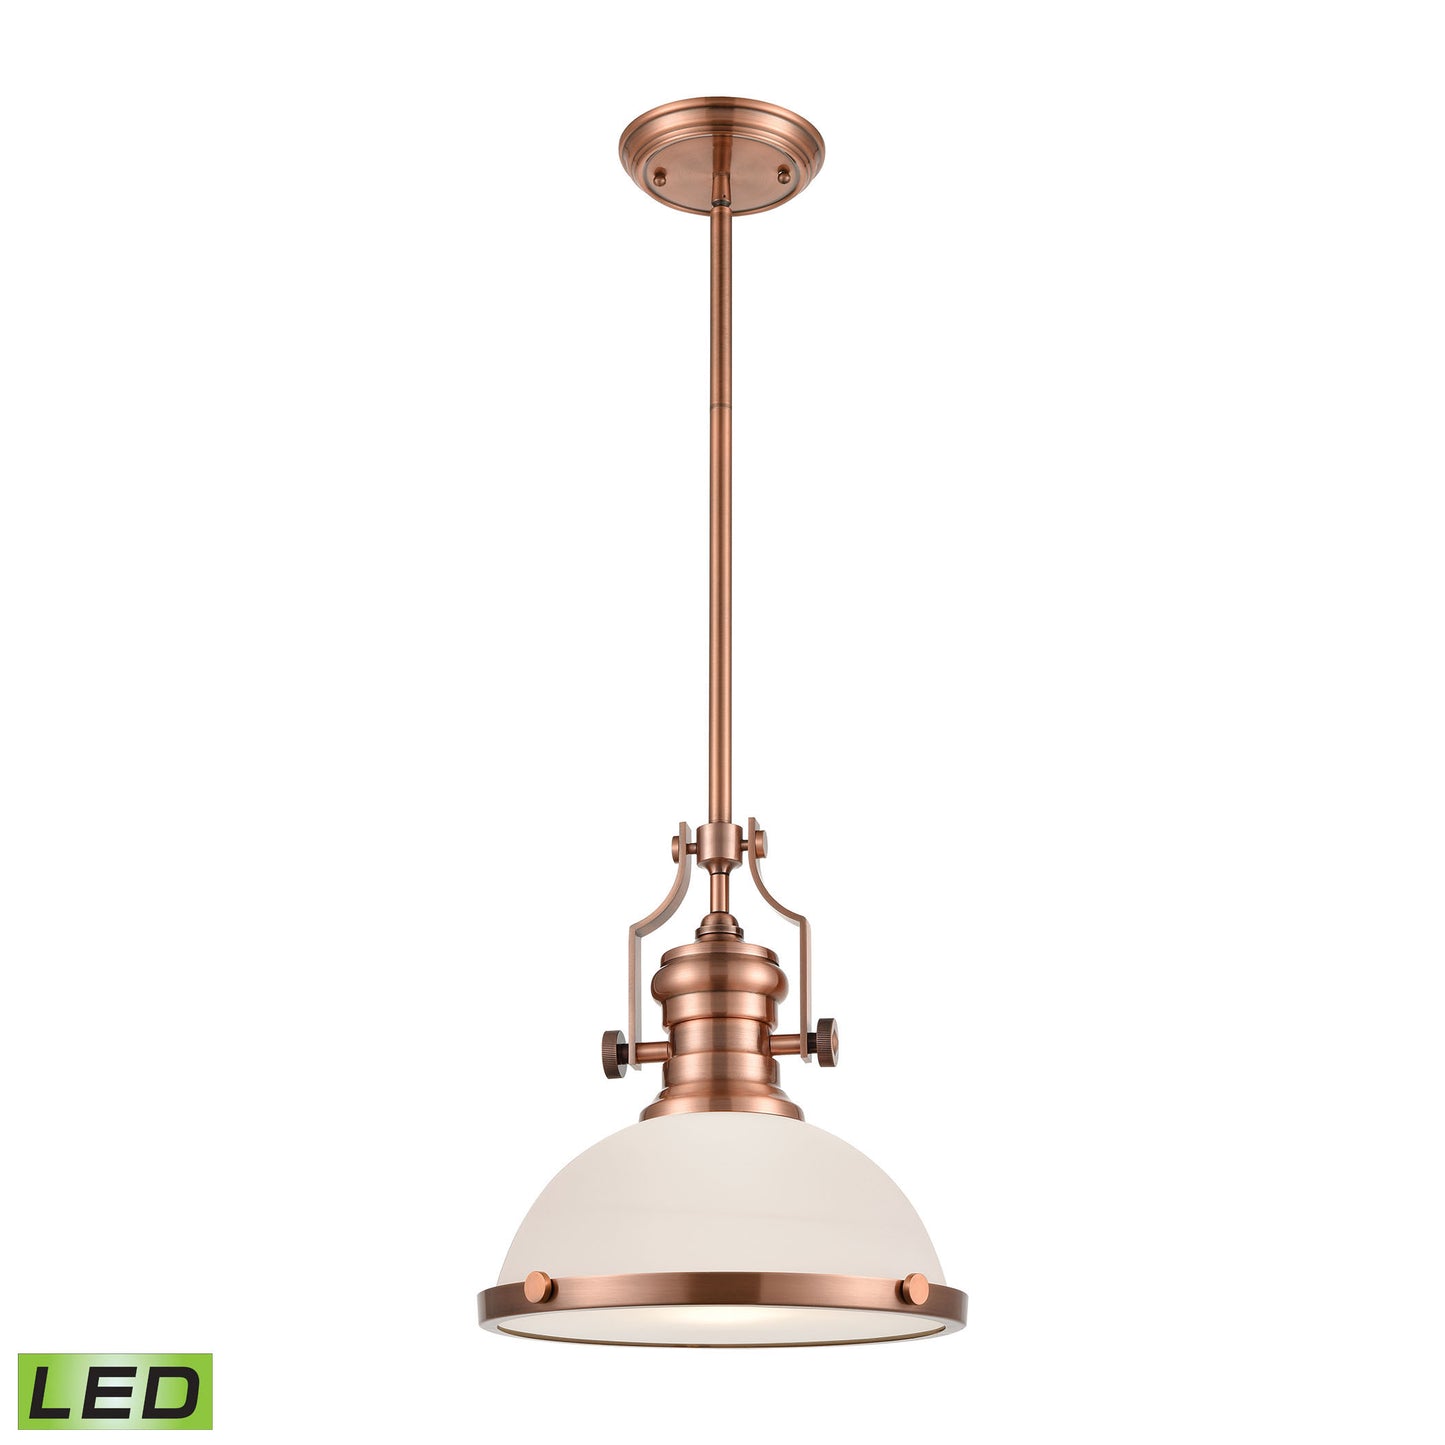 ELK Lighting 66143-1-LED - Chadwick 13" Wide 1-Light Pendant in Antique Copper with White Glass - In